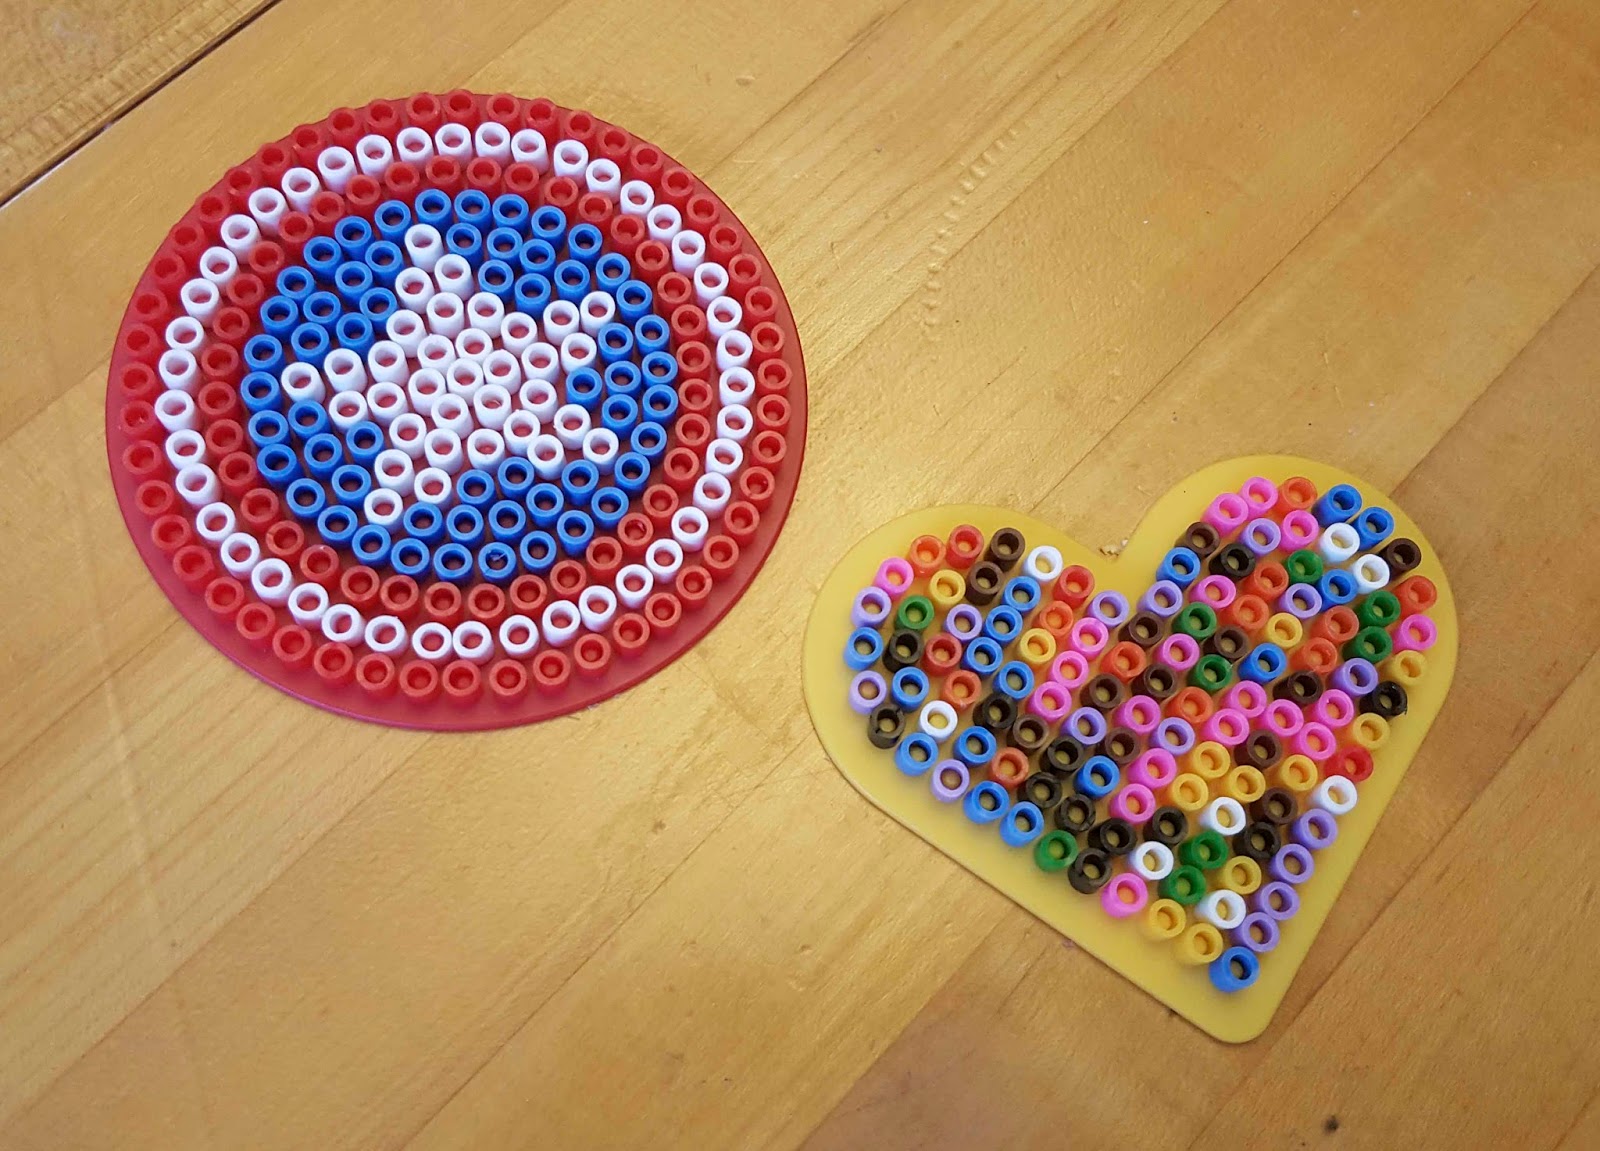 How To Iron Perler Beads - Keep Calm And Mommy On